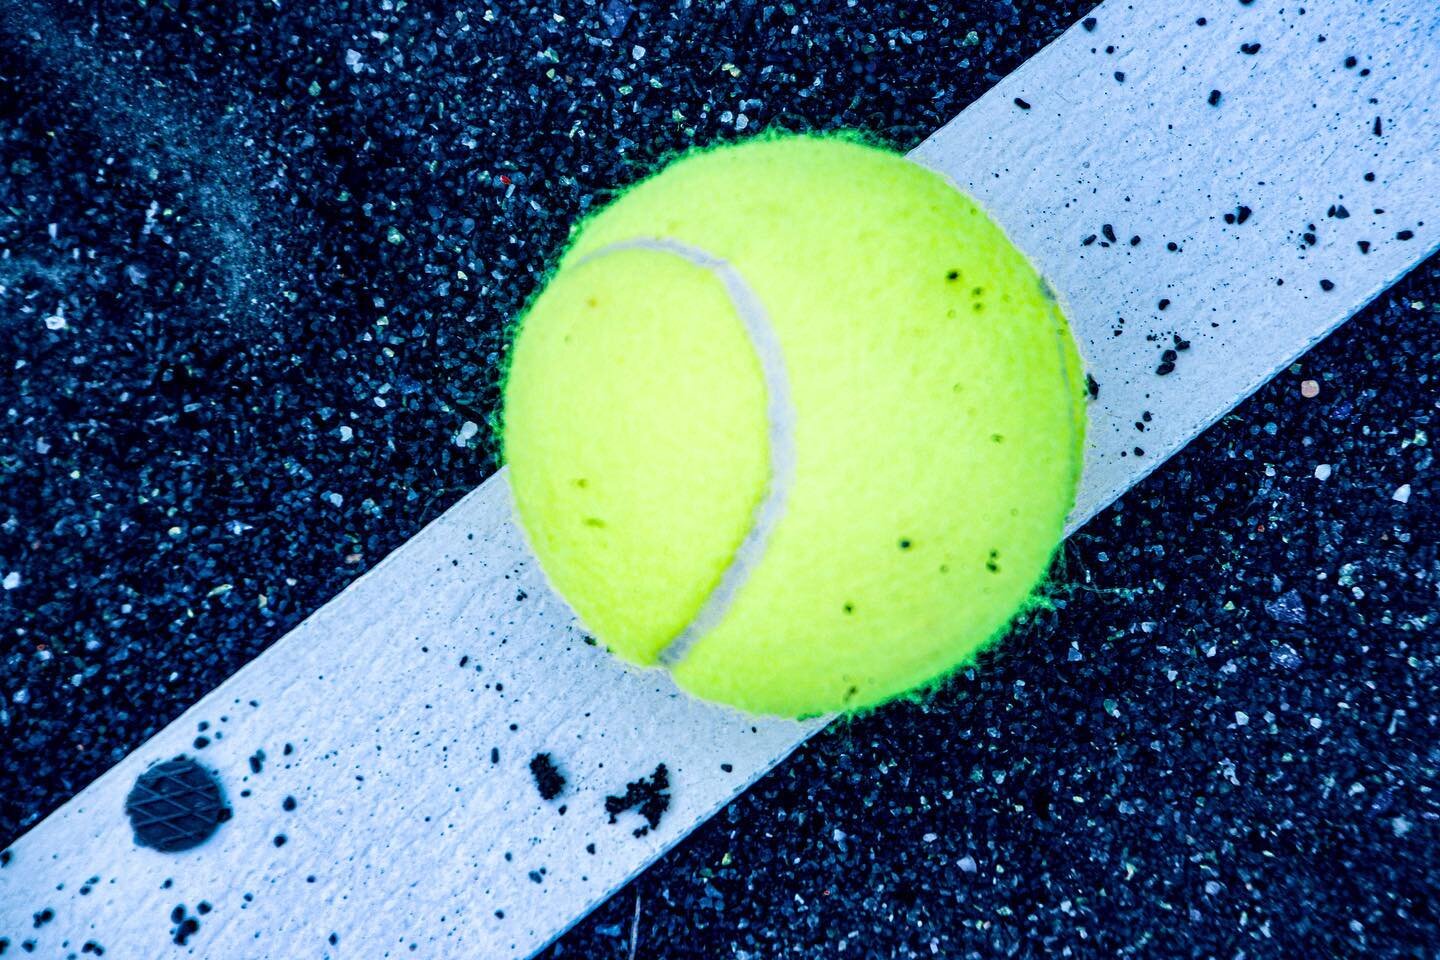 🅑🅞🅤🅝🅒🅘🅝🅖 into the weekend! 🎾🎾

Tennis Anyone? New on the website. Link in profile and in stories